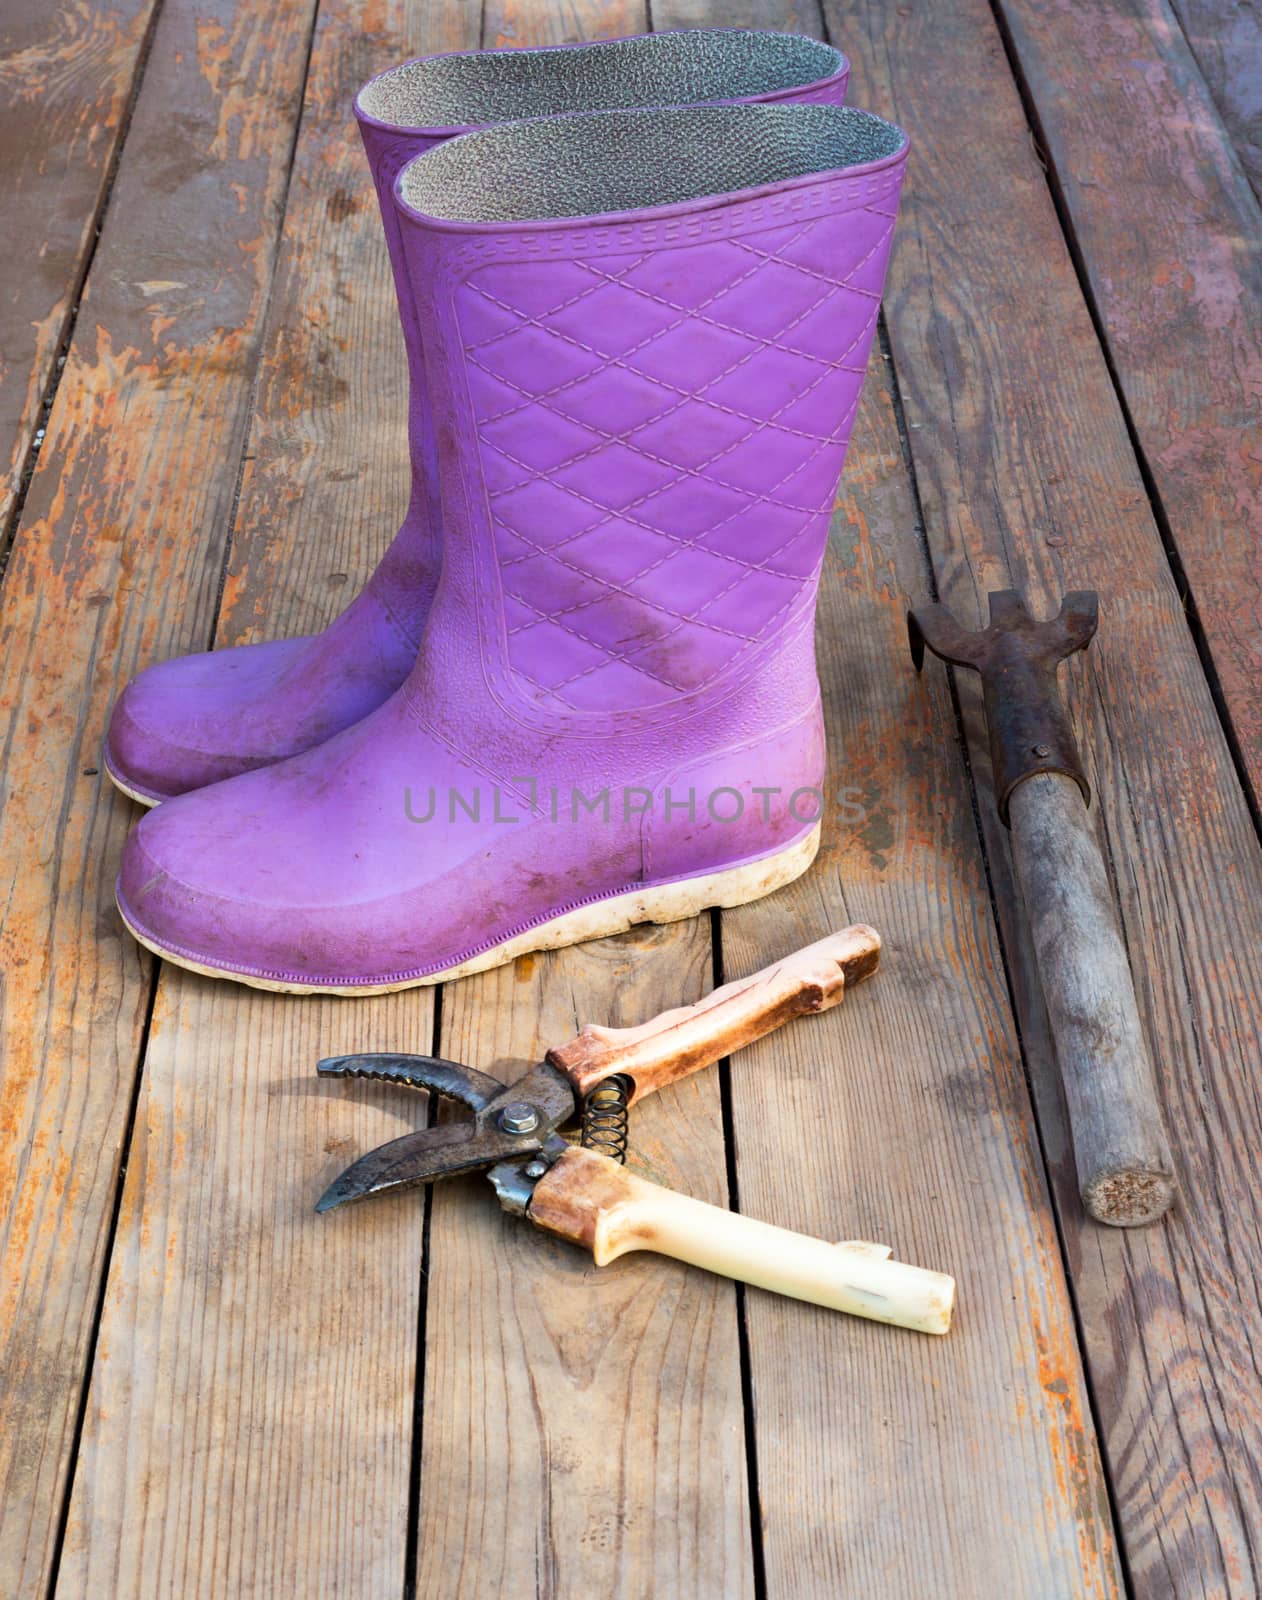 Wellingtons with garden tools on floor, side view by cherezoff